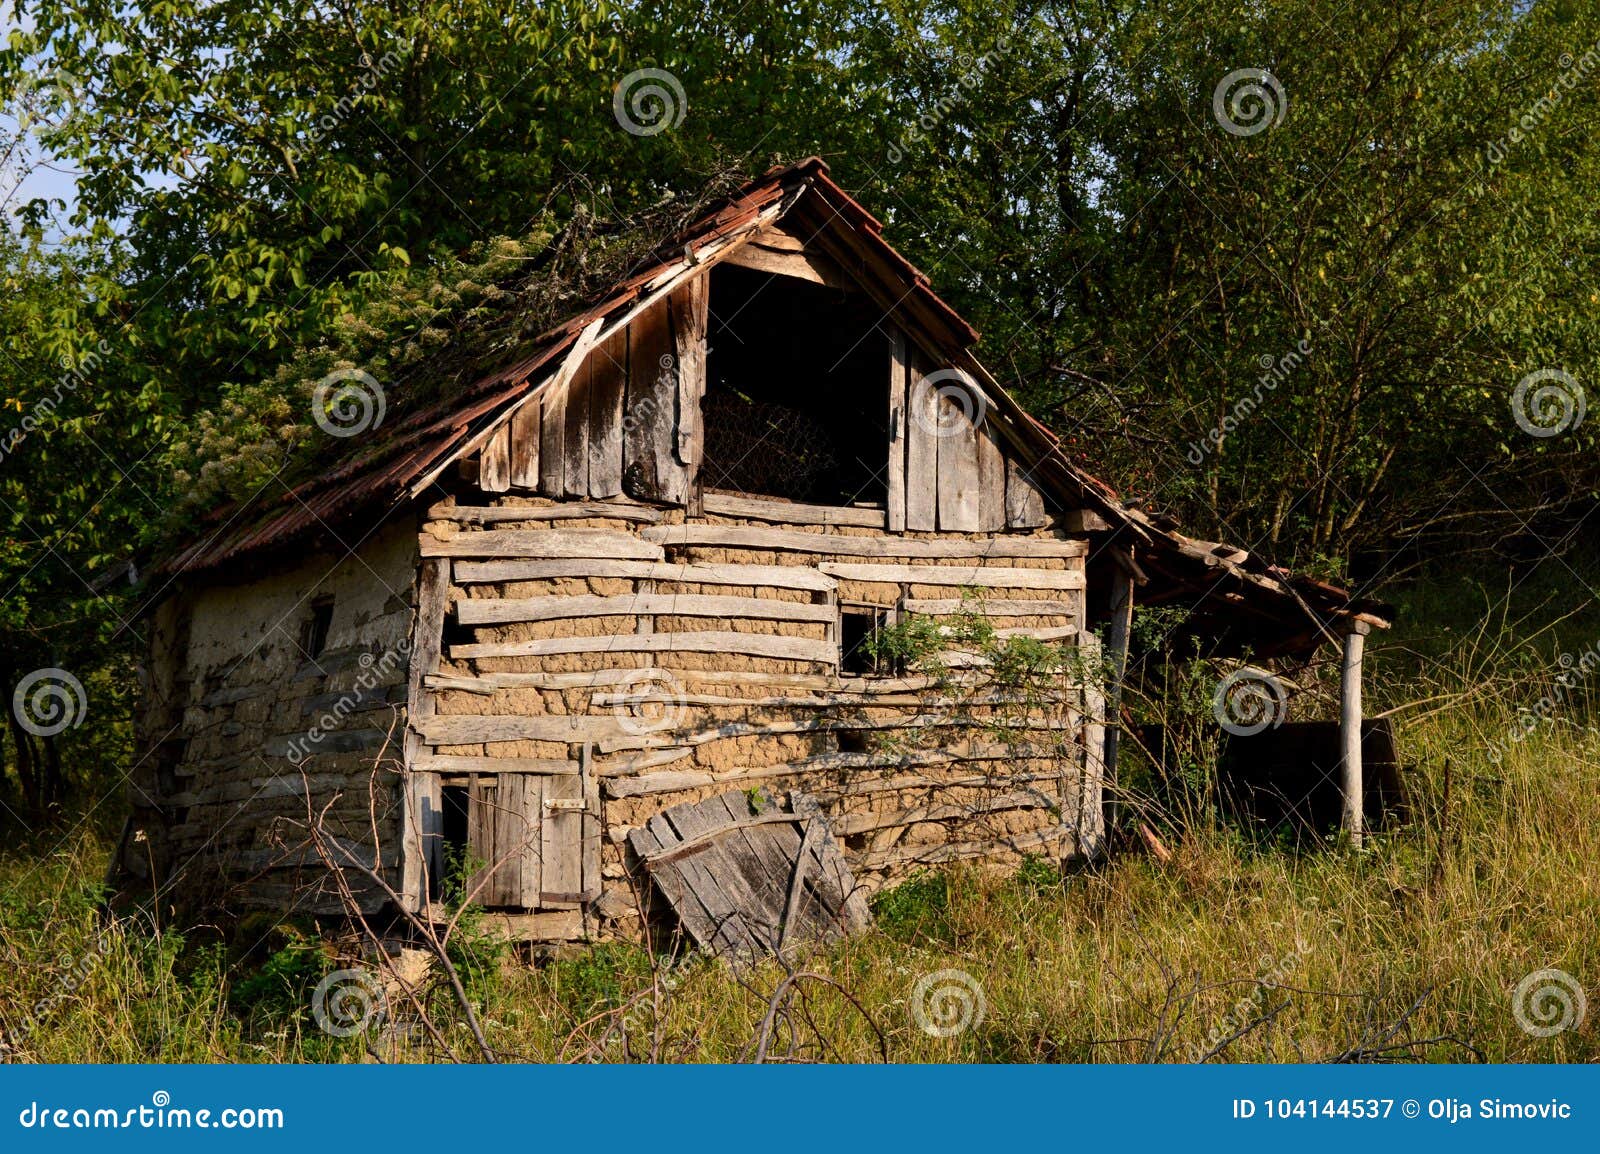 Old little abandoned house stock image. Image of color - 104144537